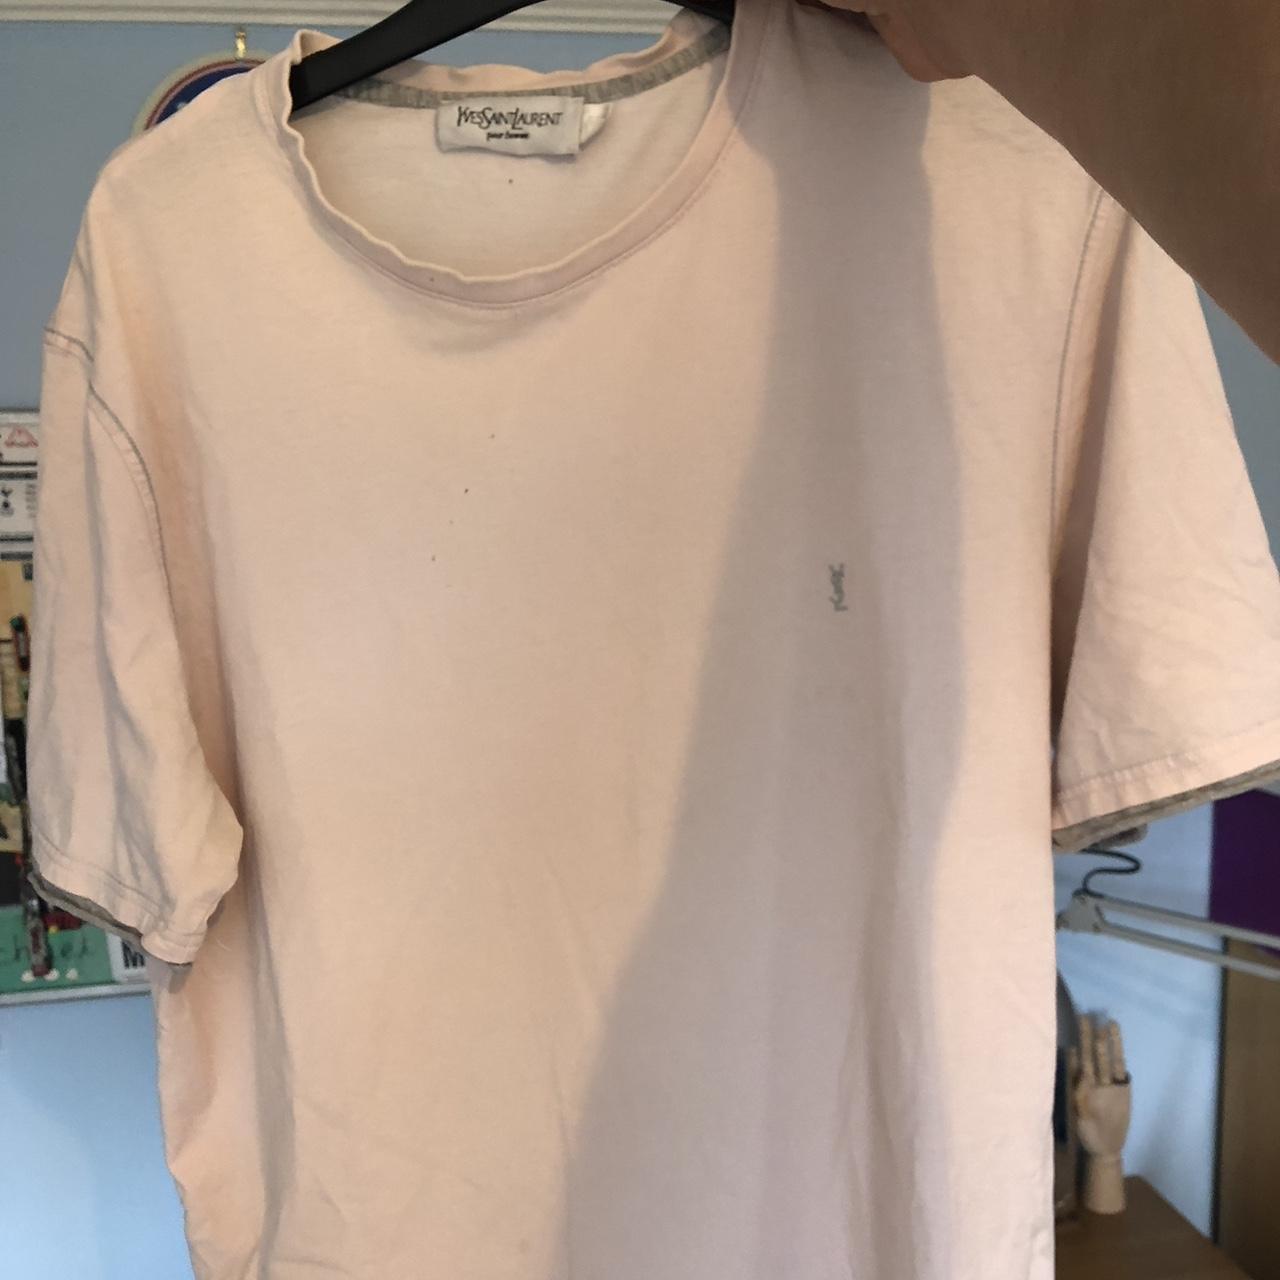 Authentic Vintage YSL/Yves Saint Laurent Grey Polo Shirt with Pink